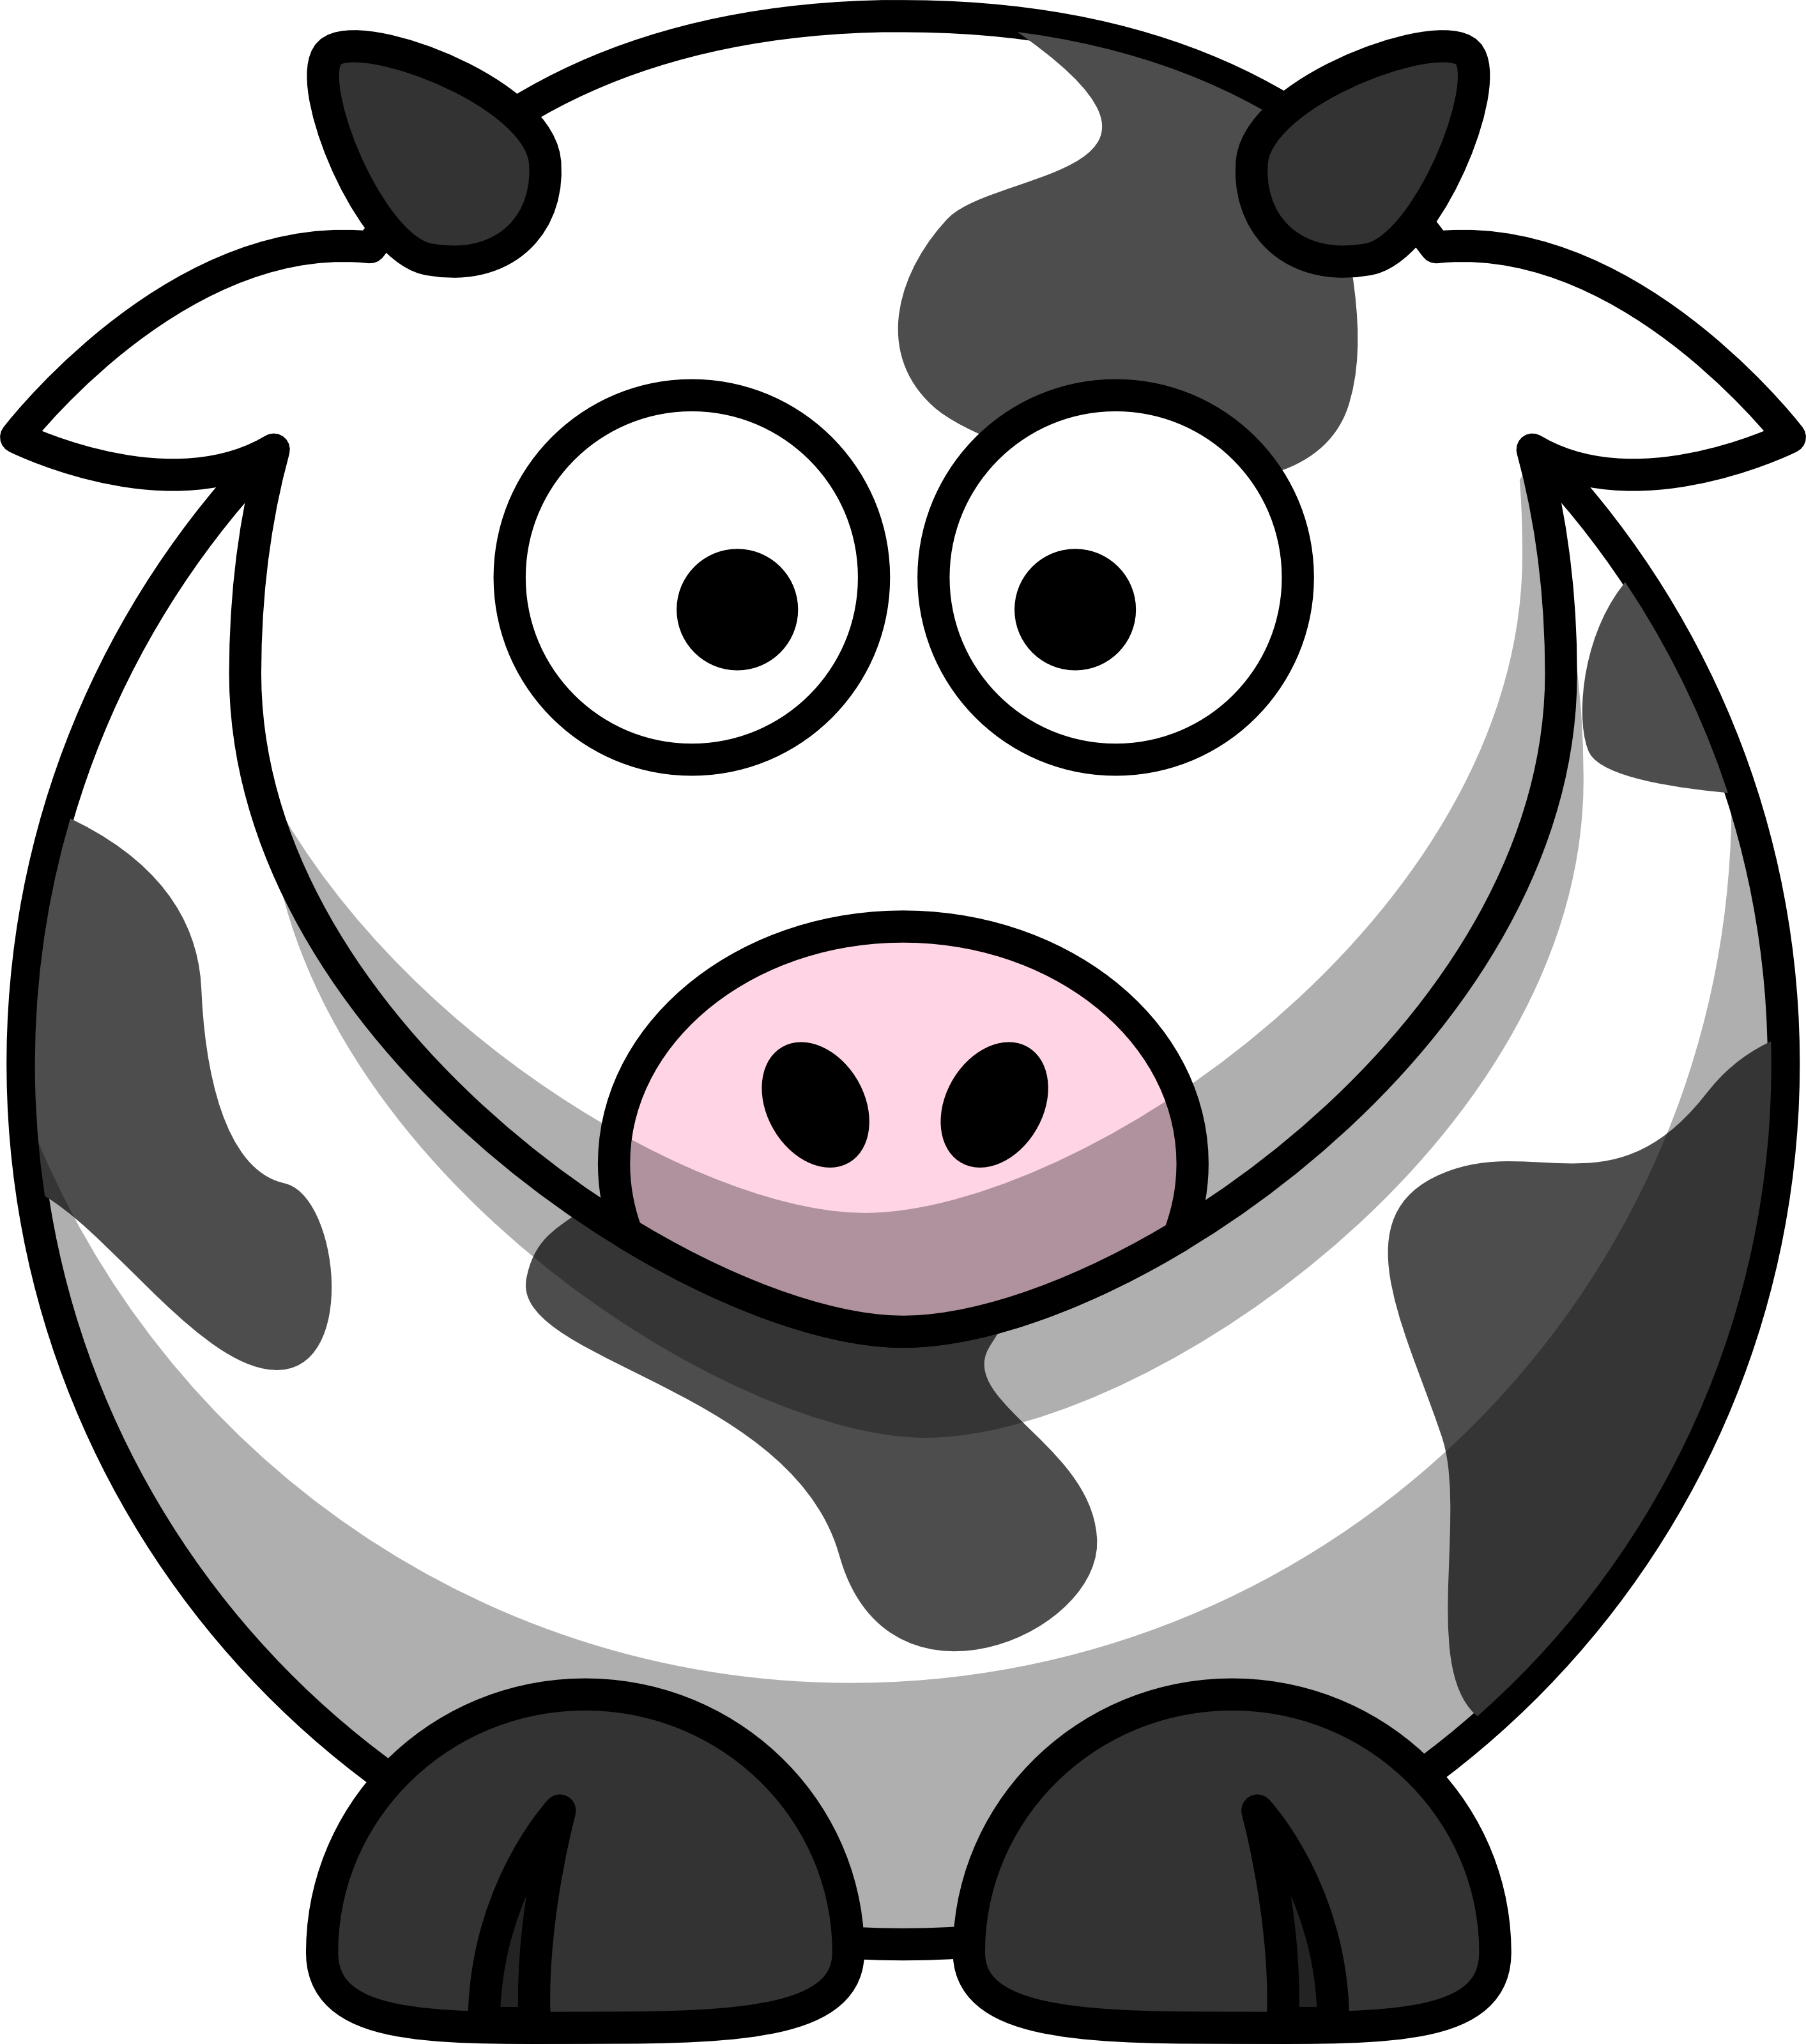 free black and white clipart of animals - photo #35